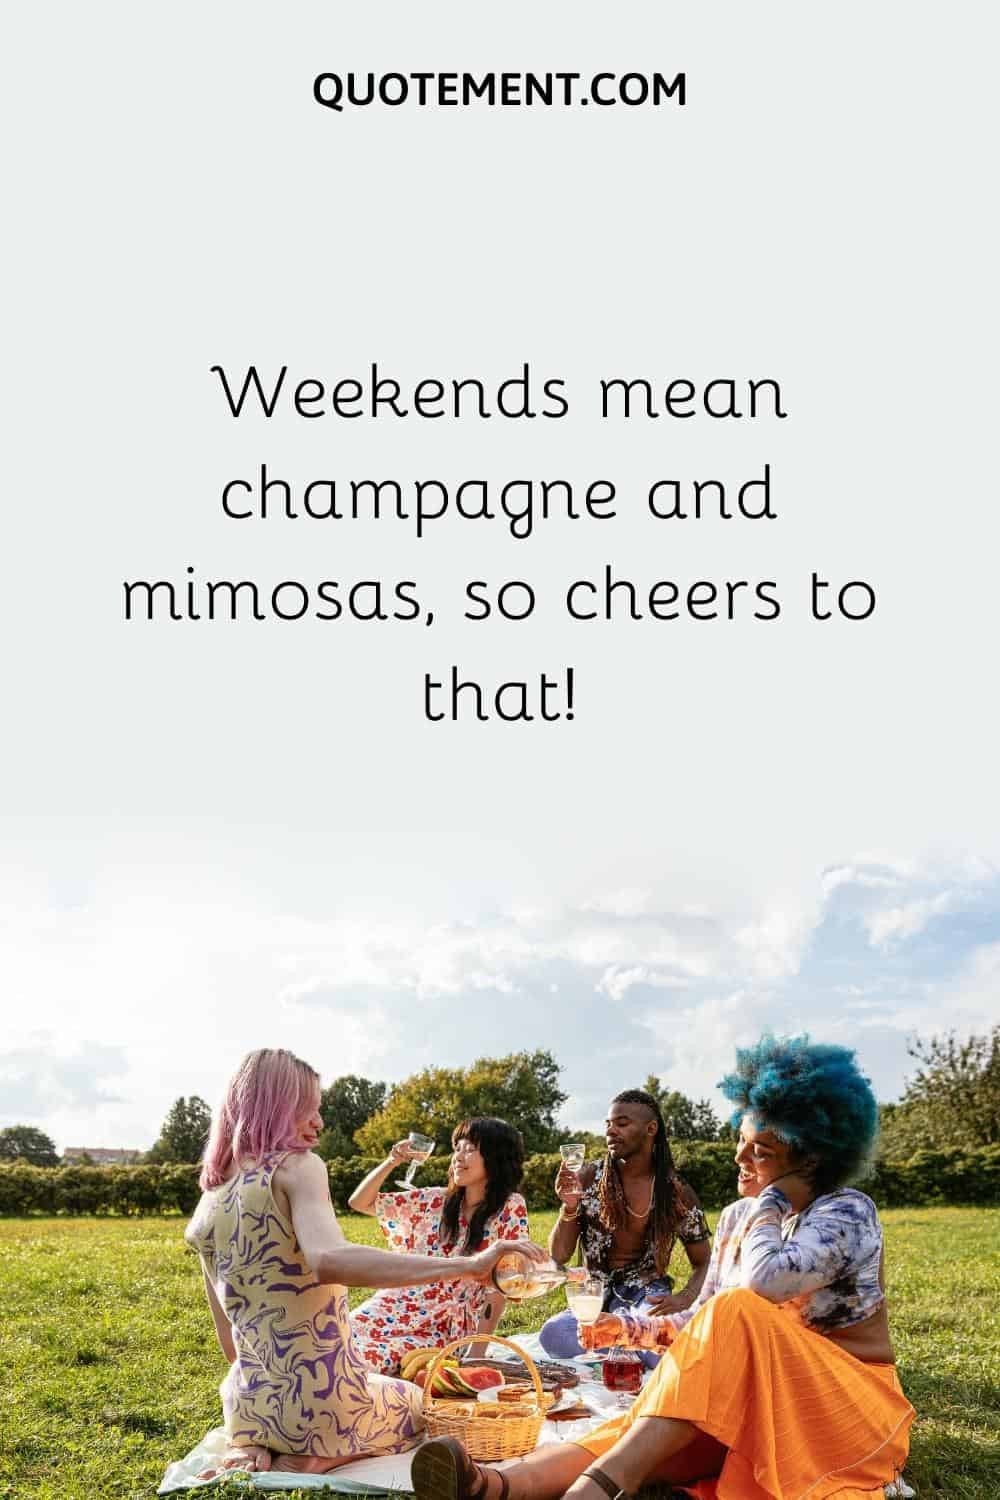 Weekends mean champagne and mimosas, so cheers to that!